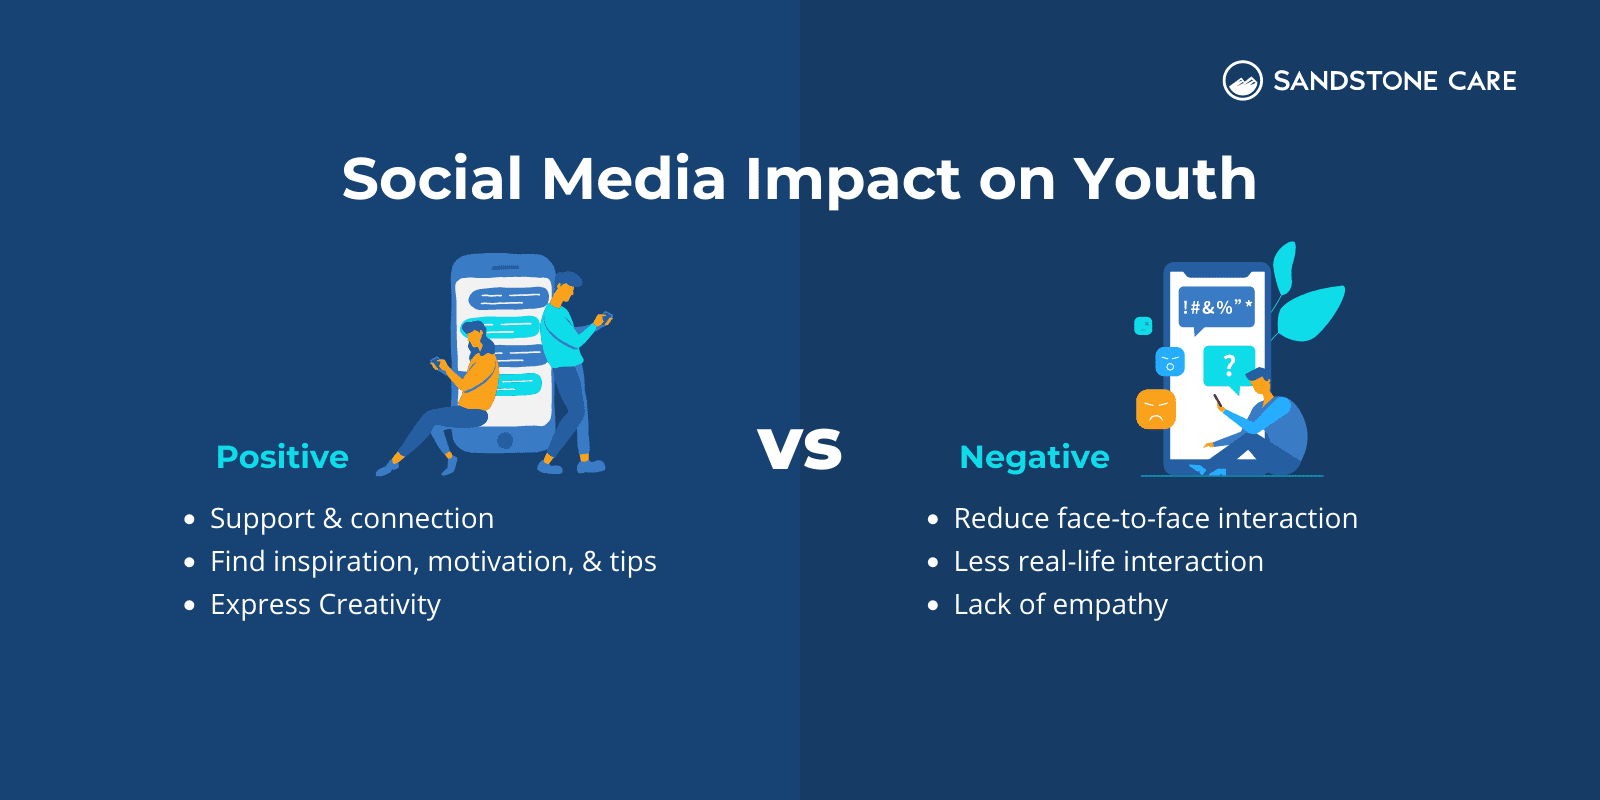 Social Media Impact on Youth listed out in 2 categories of positive and negative impact with relevant graphics